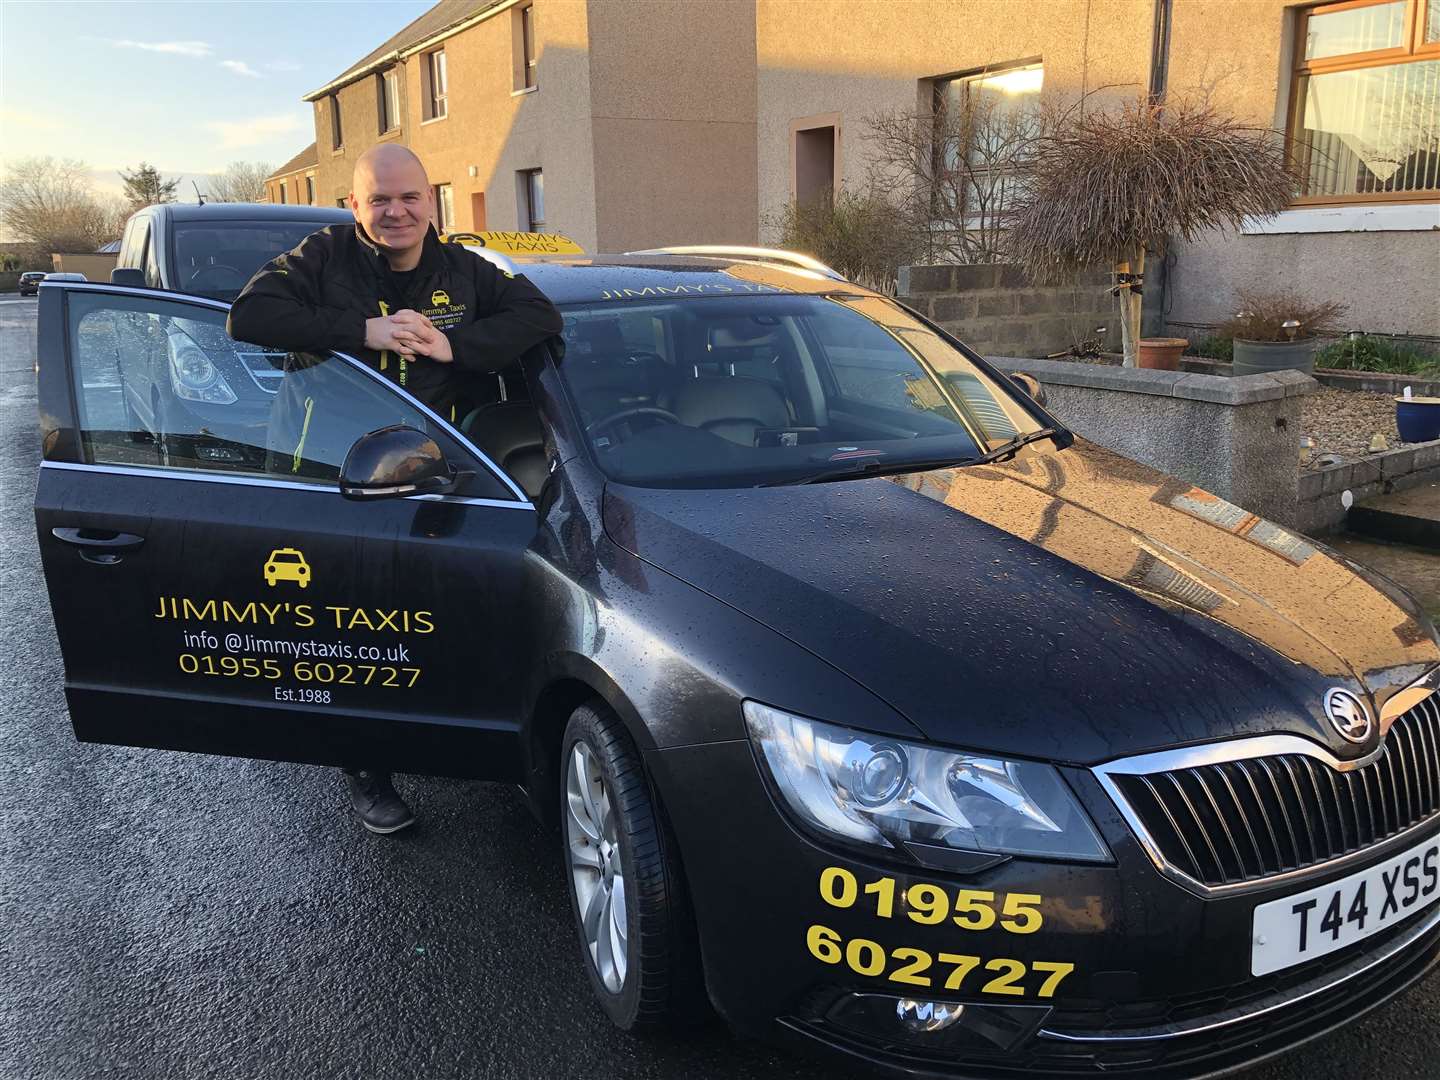 Brian Travers, owner and driver with Jimmy's Taxis.